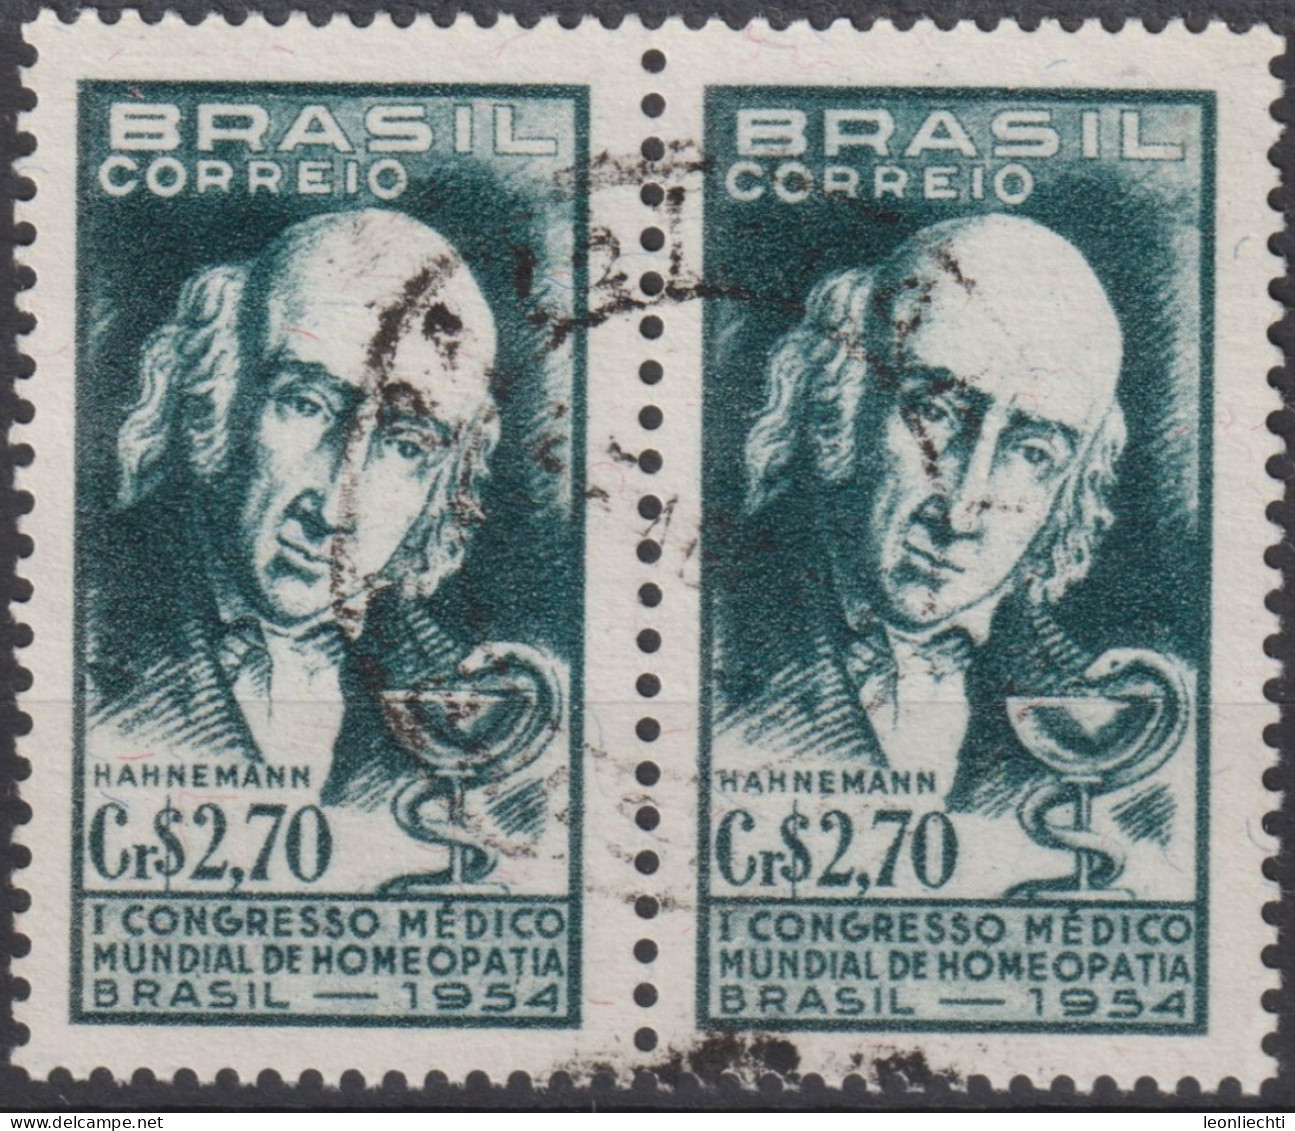 1954 Brasilien ° Mi:BR 862, Sn:BR 810, Yt:BR 592, Hahnemann, 1st World Congress Of Homeopathy - Used Stamps